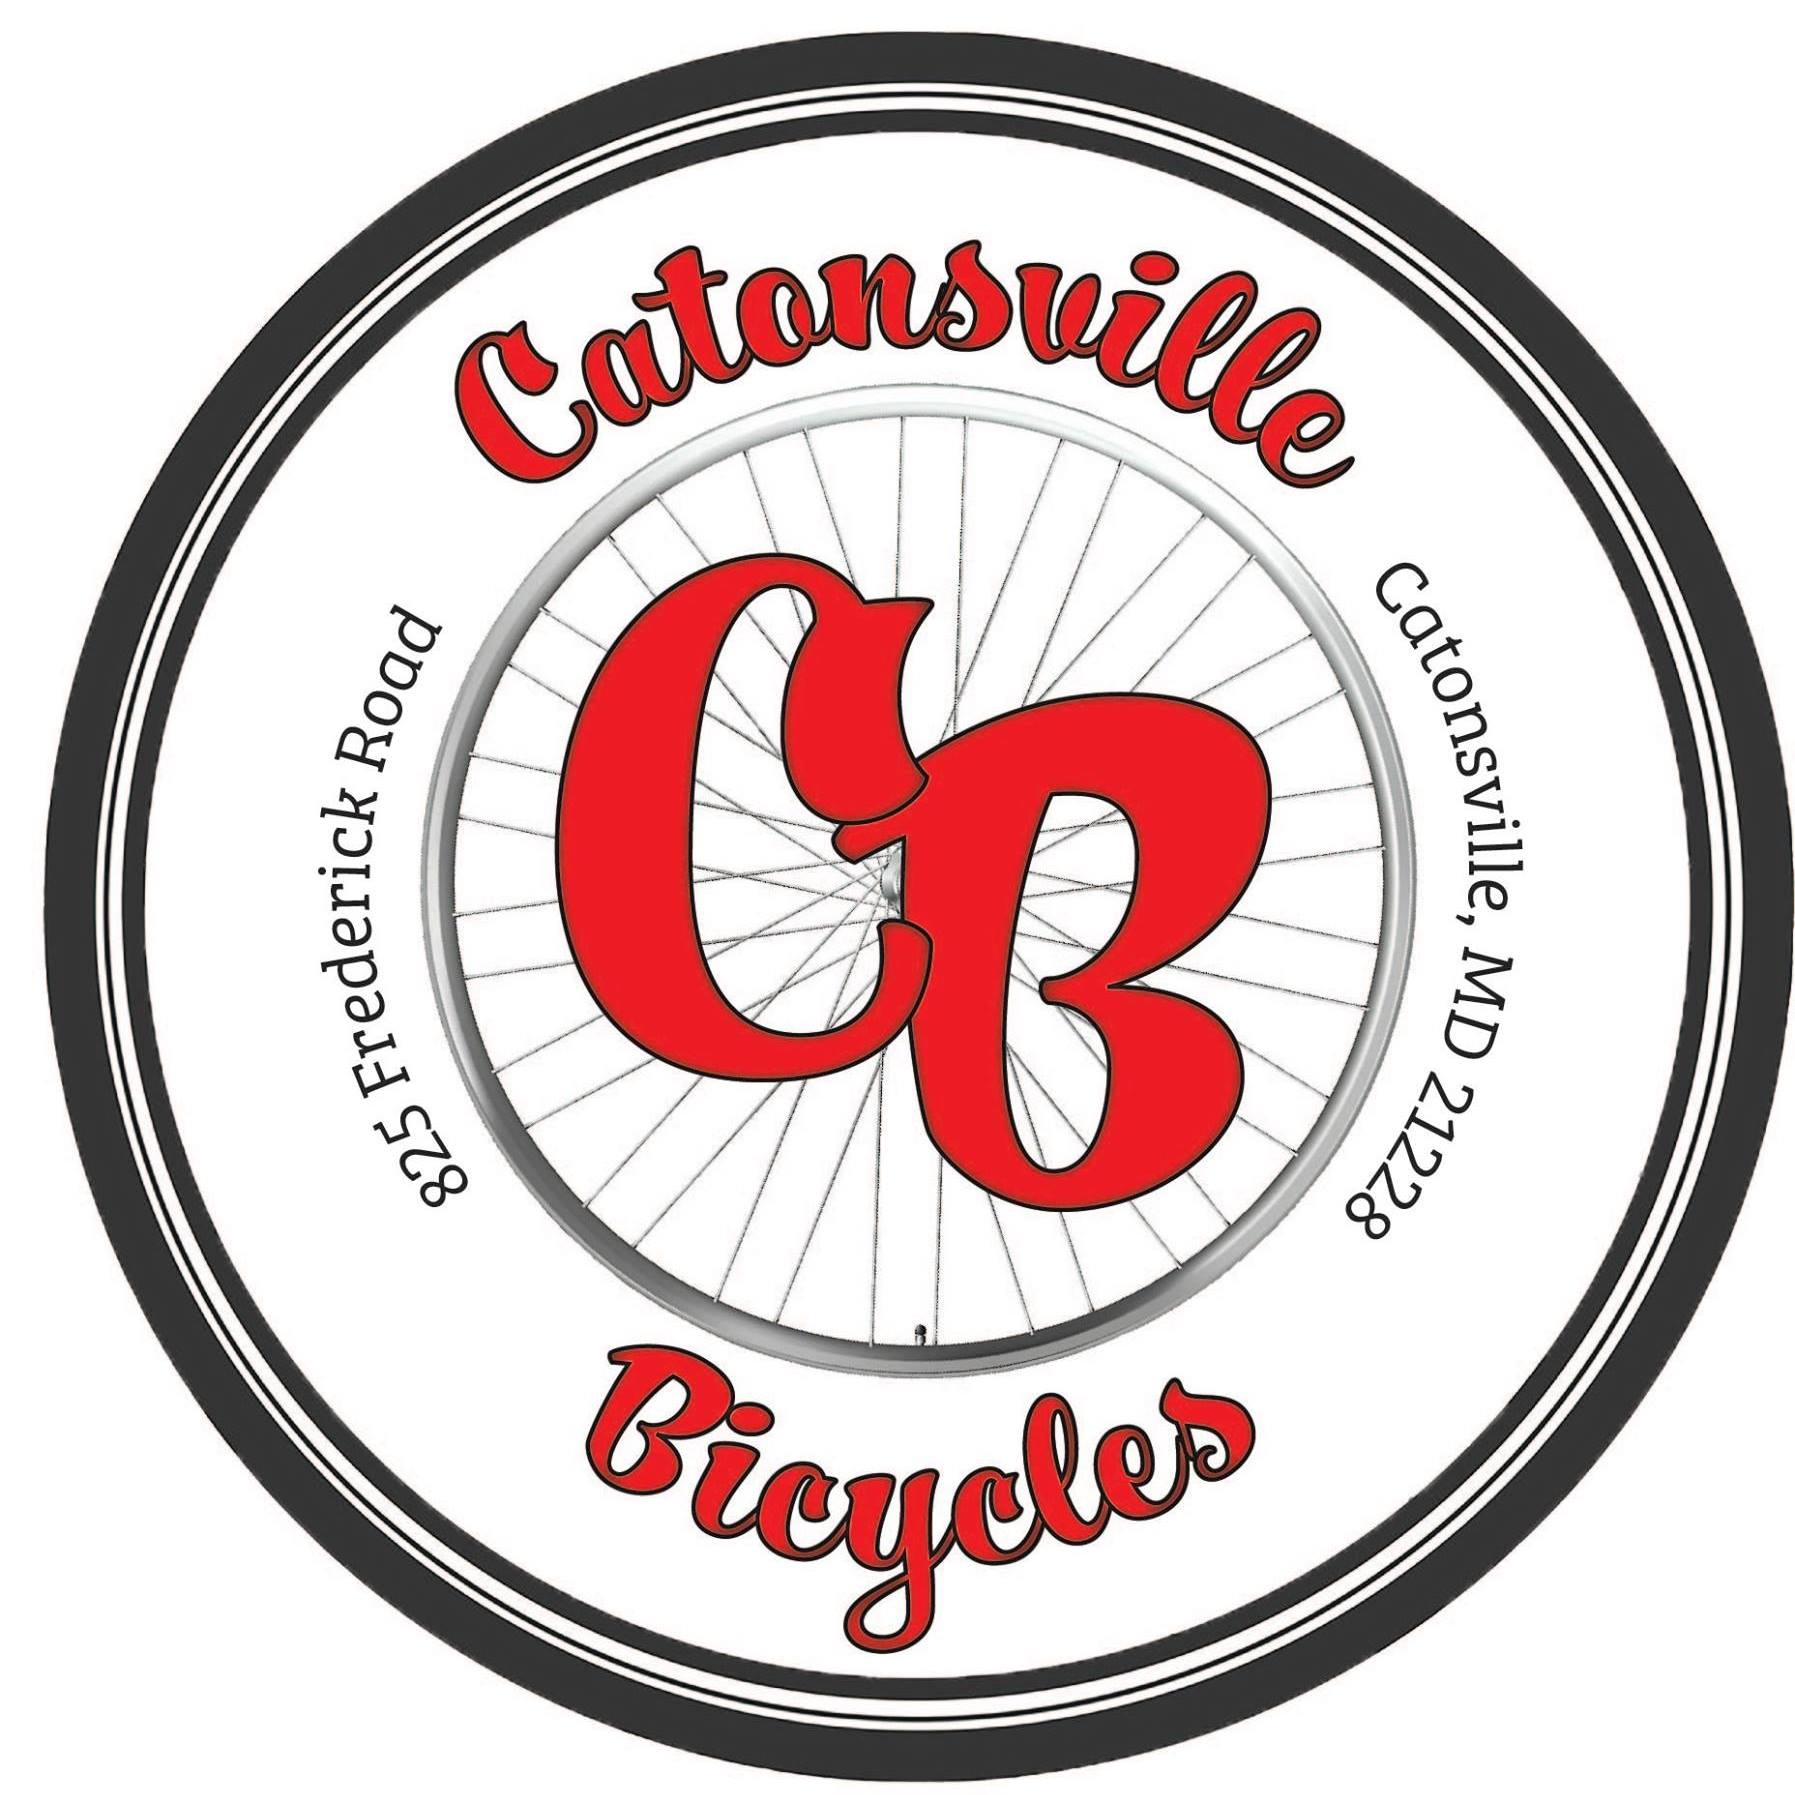 Catonsville Bicycles